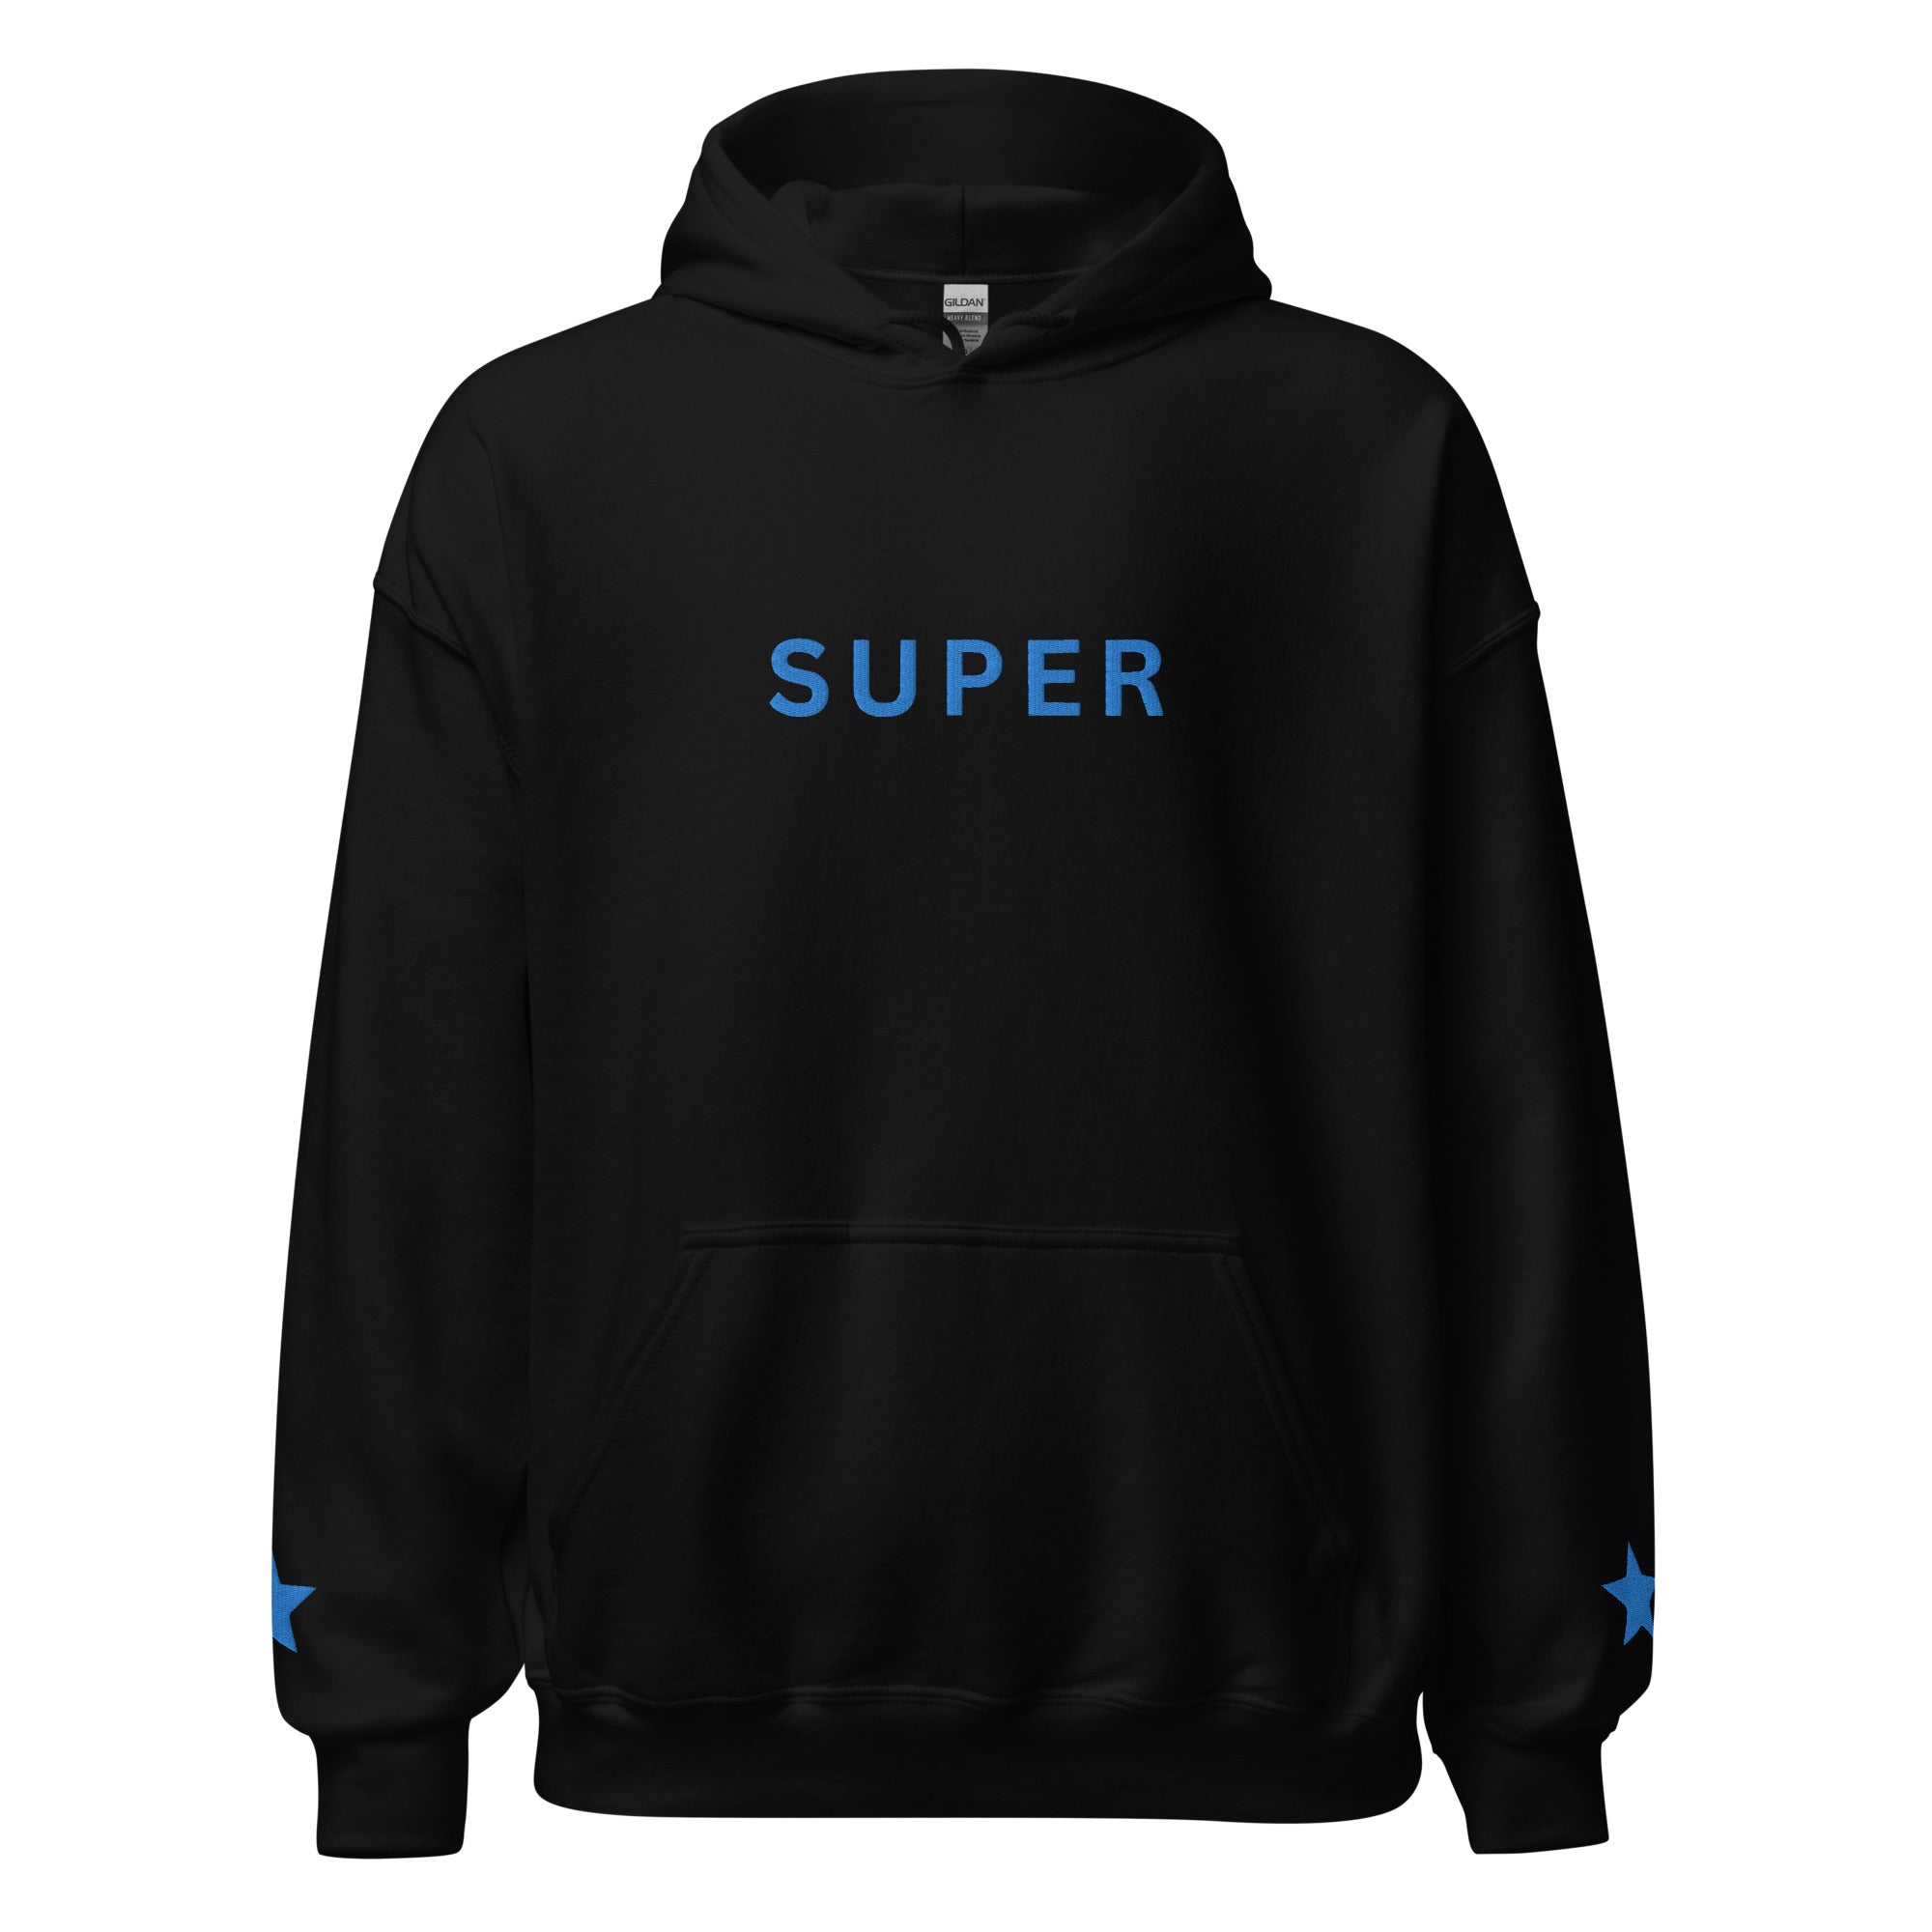 Super Cyborg Franky Embroidered Unisex Anime Hoodie